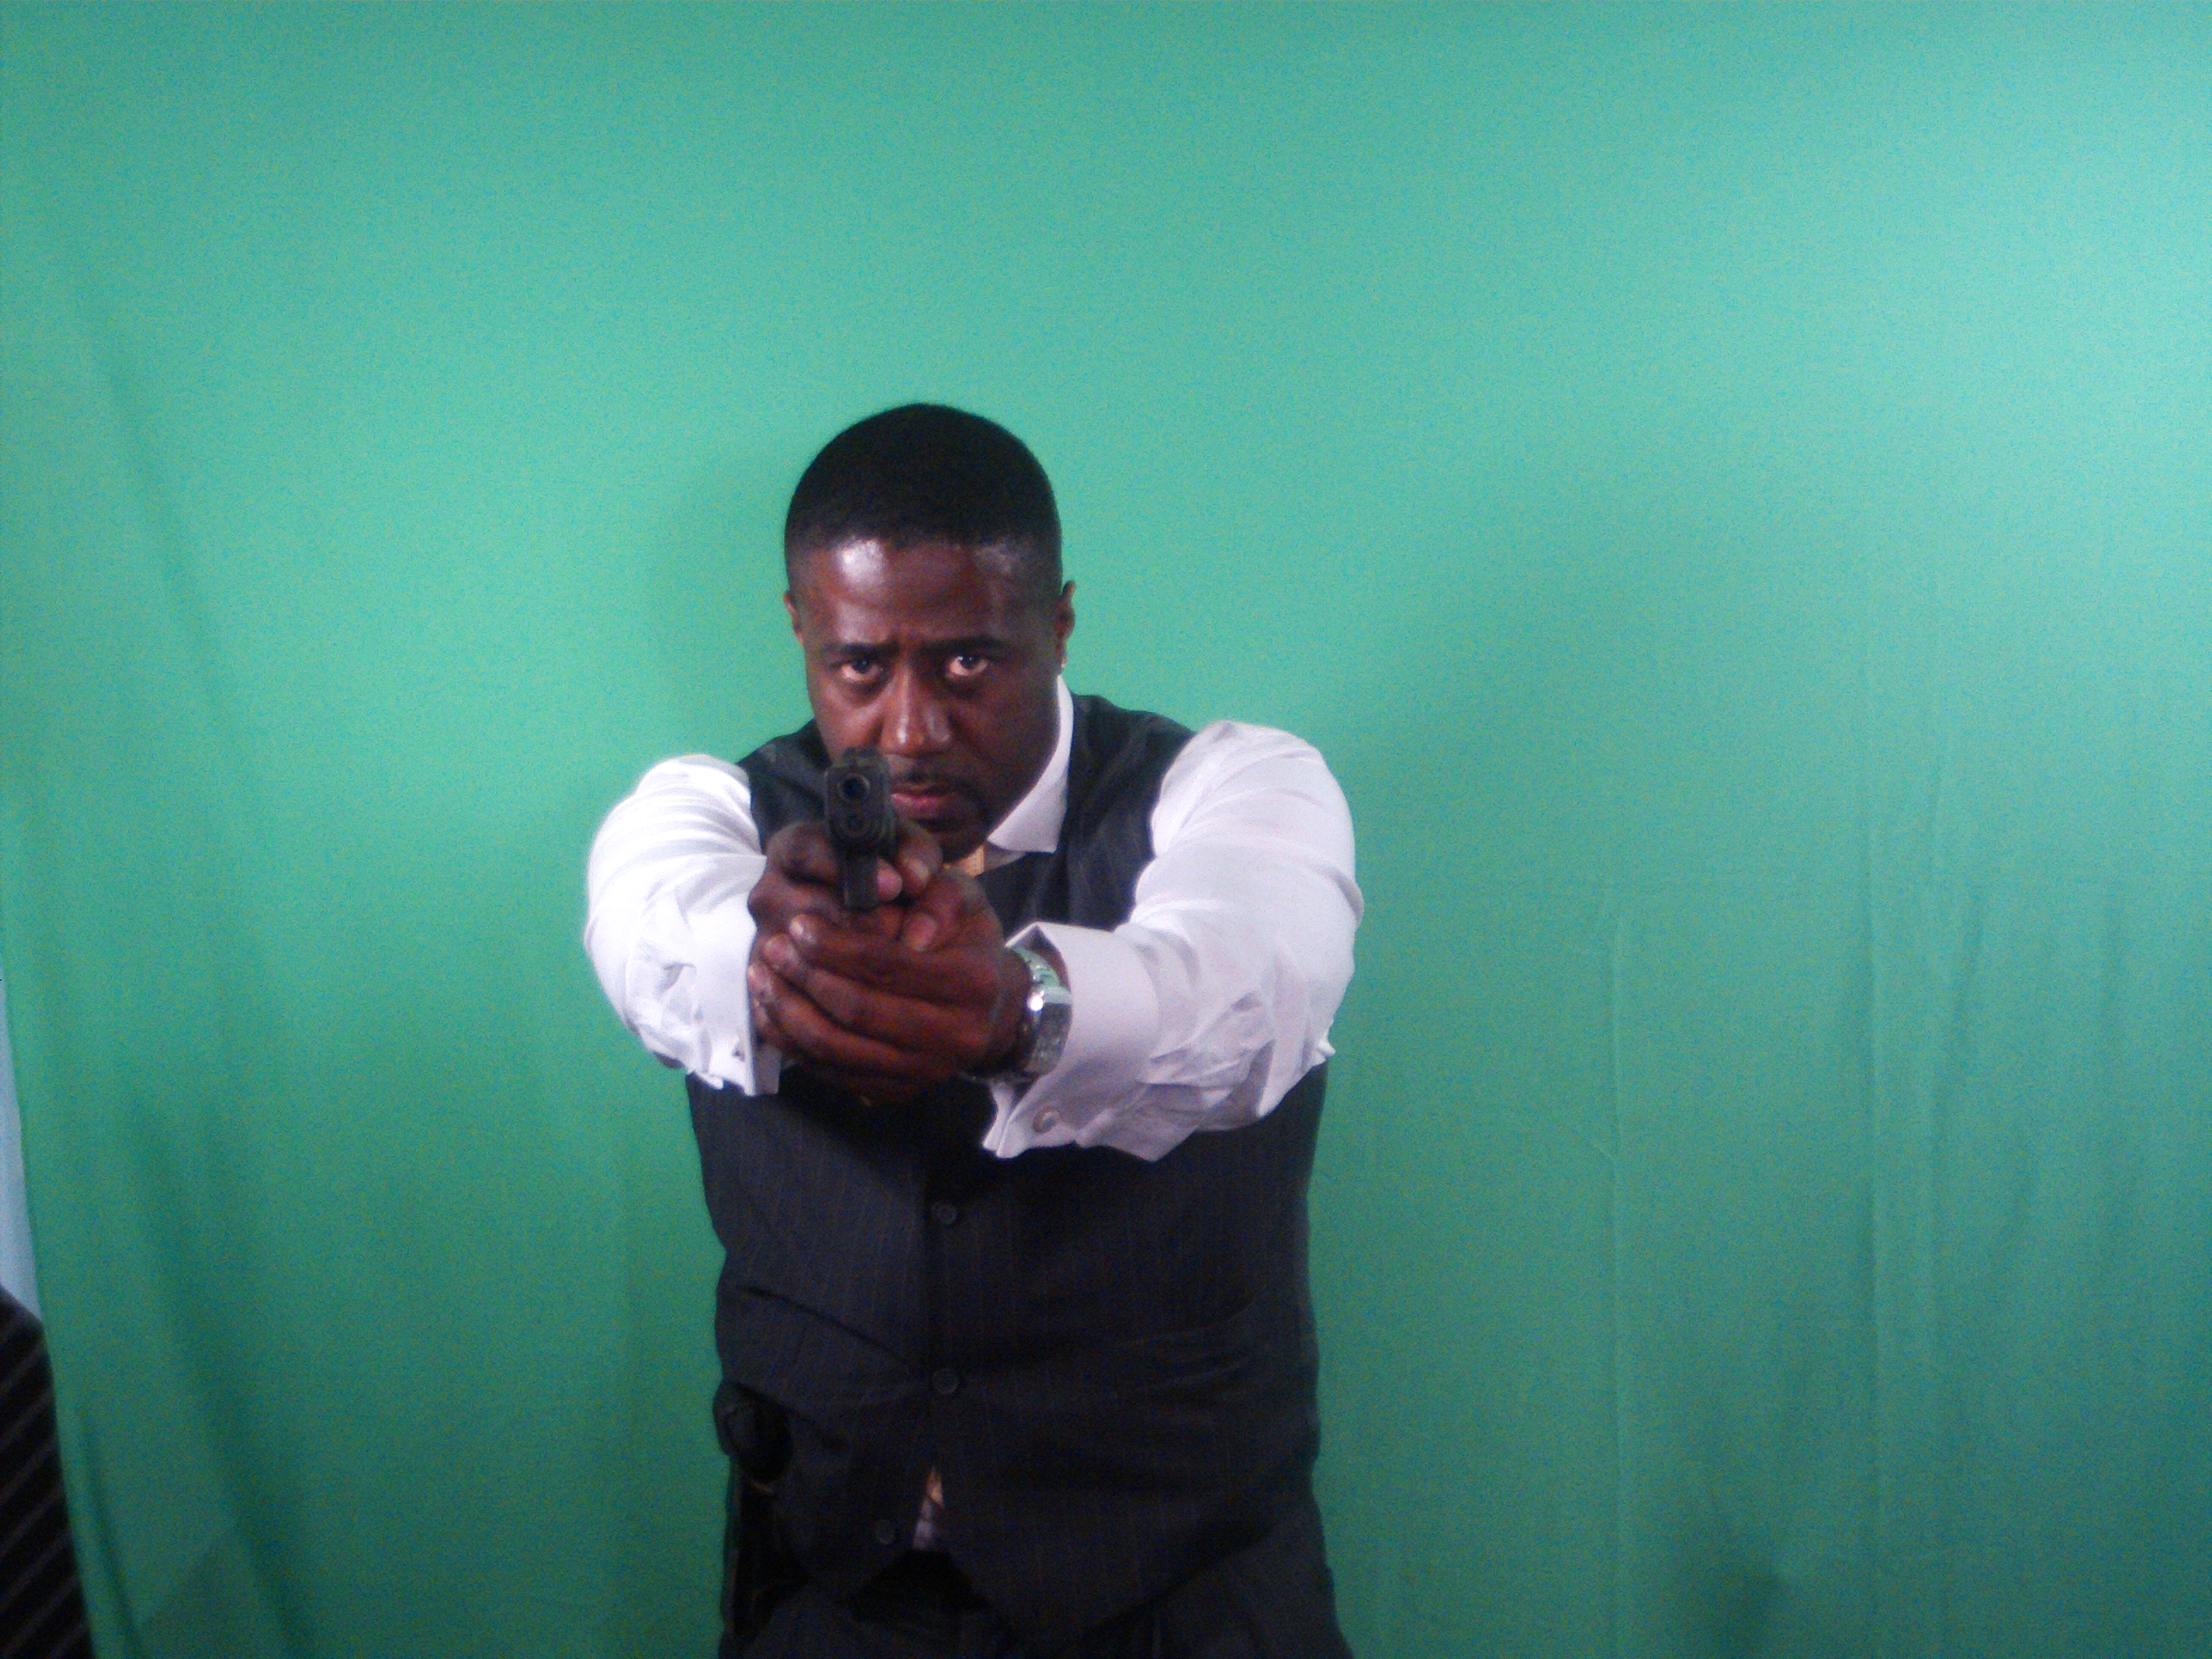 AS JAMES MARKS, ON THE SET OF DISHONORABLE VENDETTA